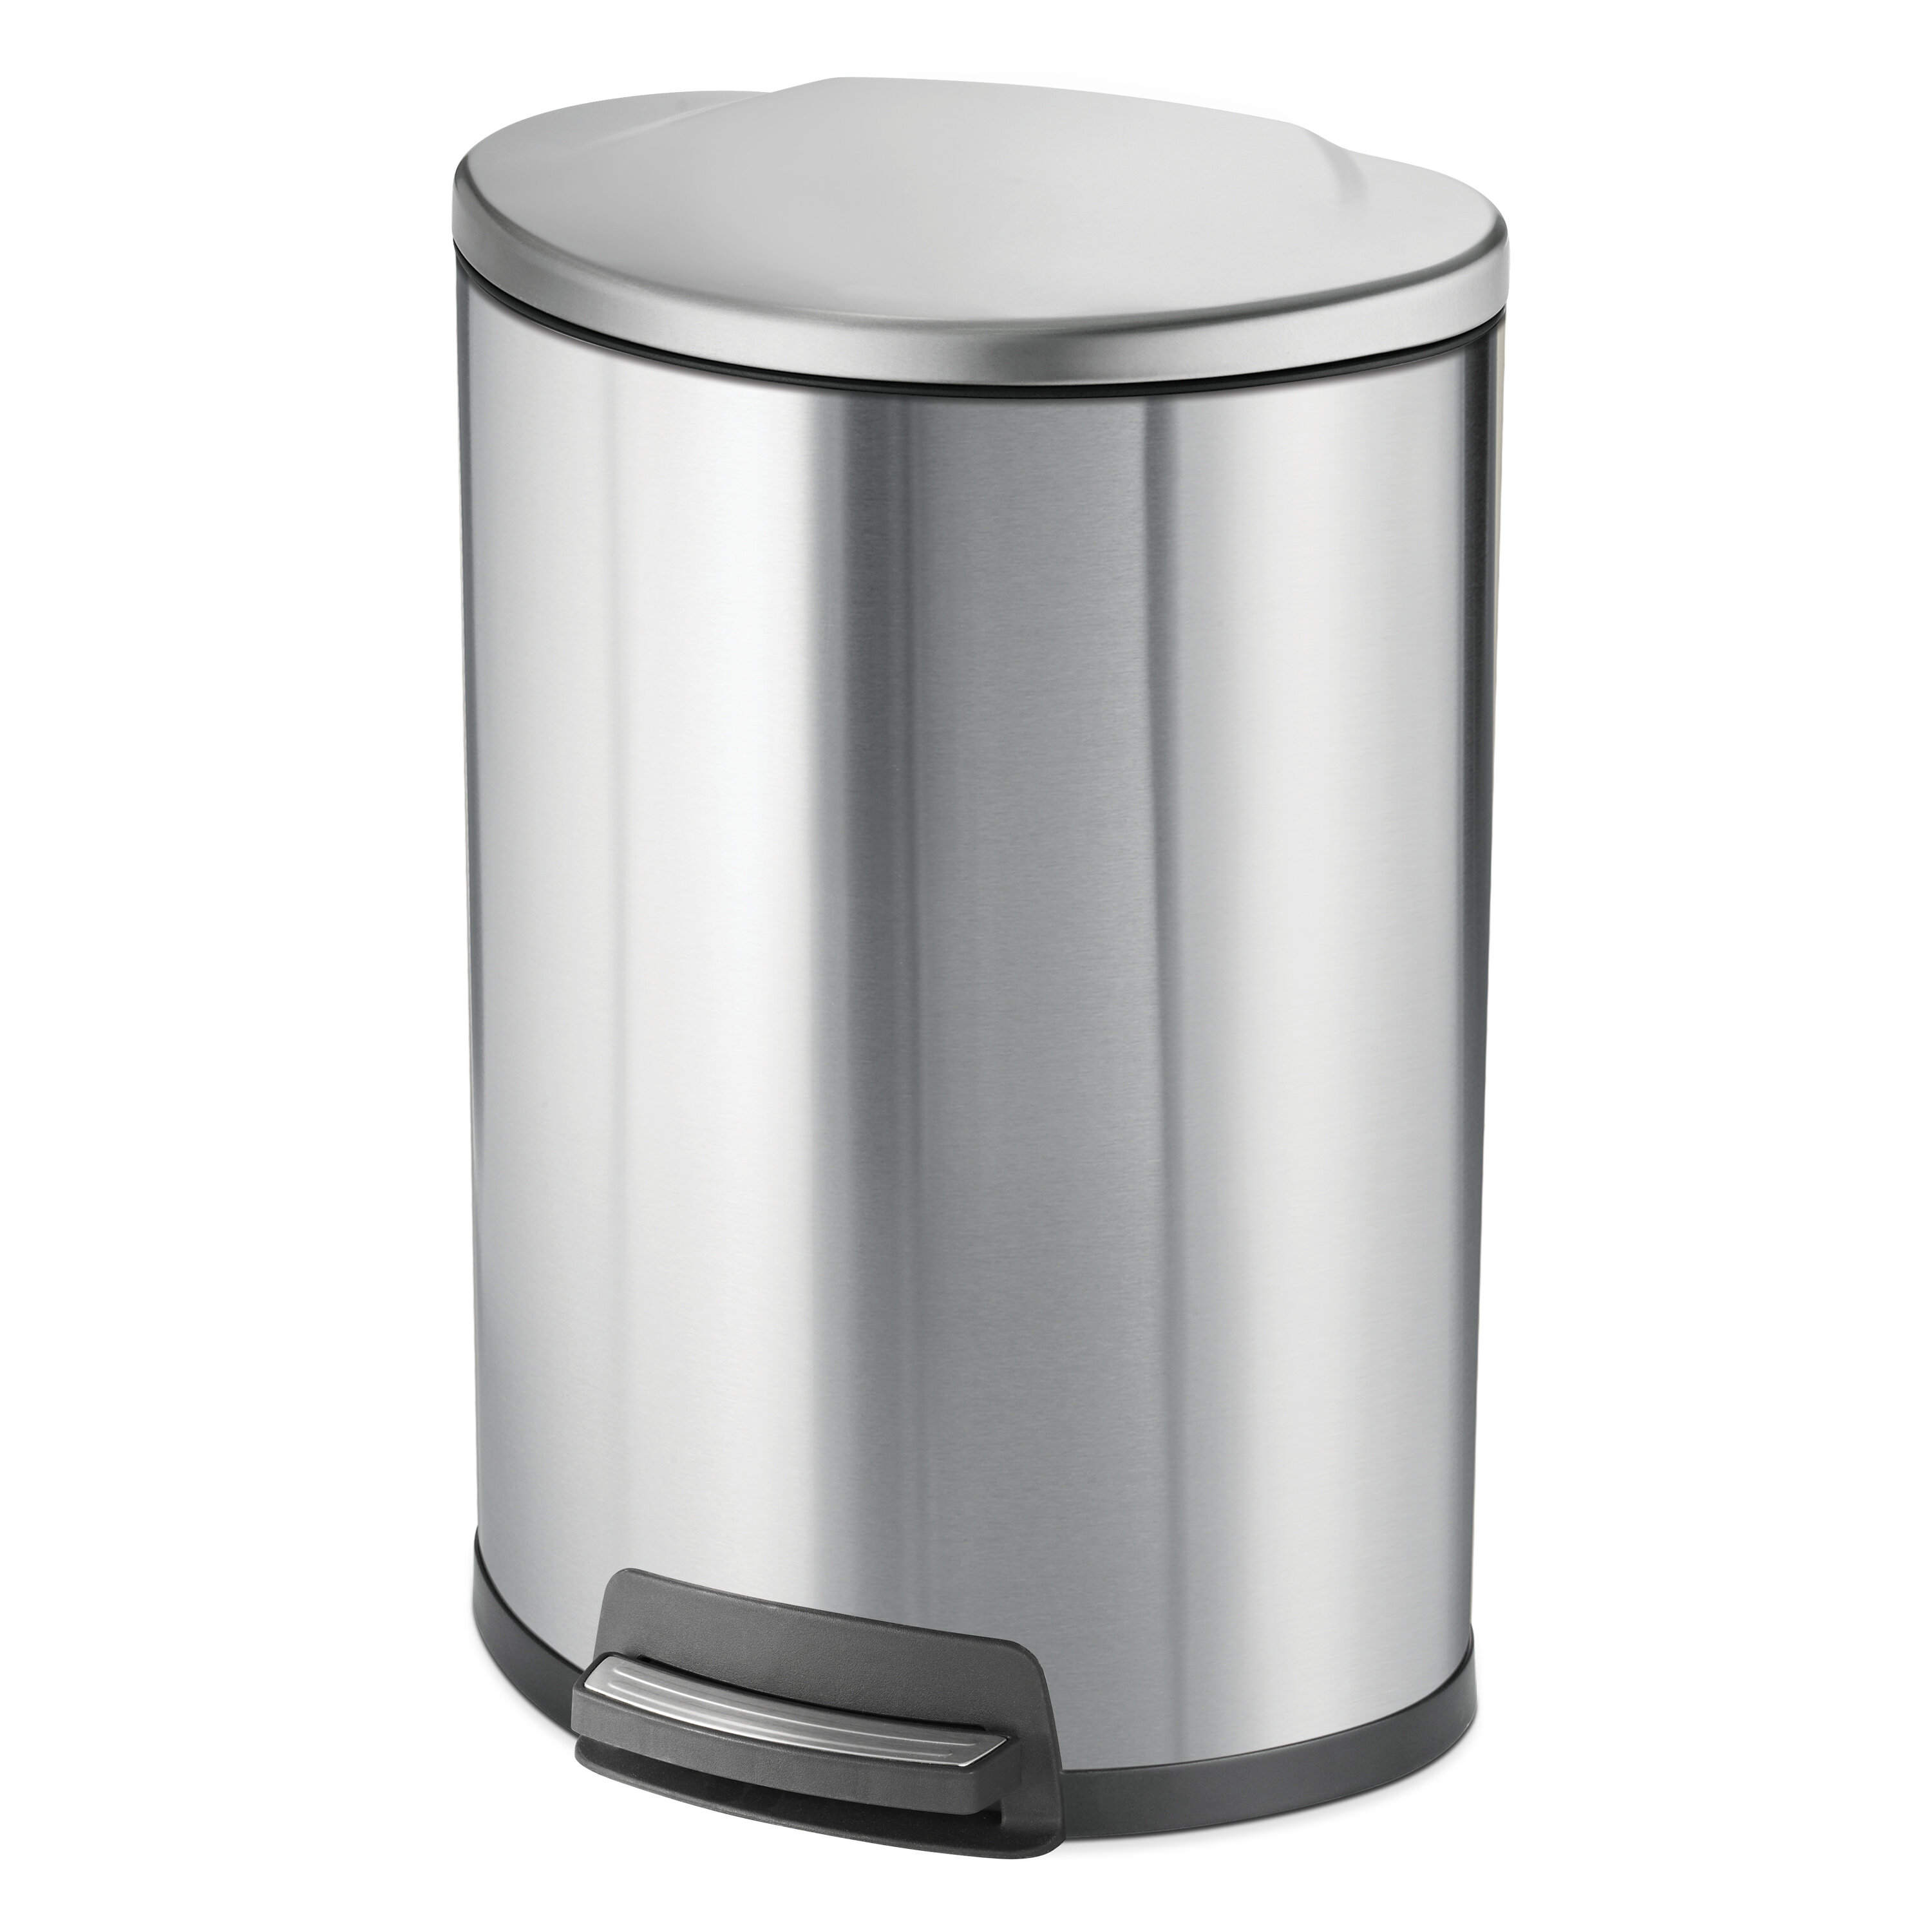 13 Gallon Copper Trash Can - Target/home/trash cans 13 gallon (336 Target Stainless Steel Trash Can 13 Gallon